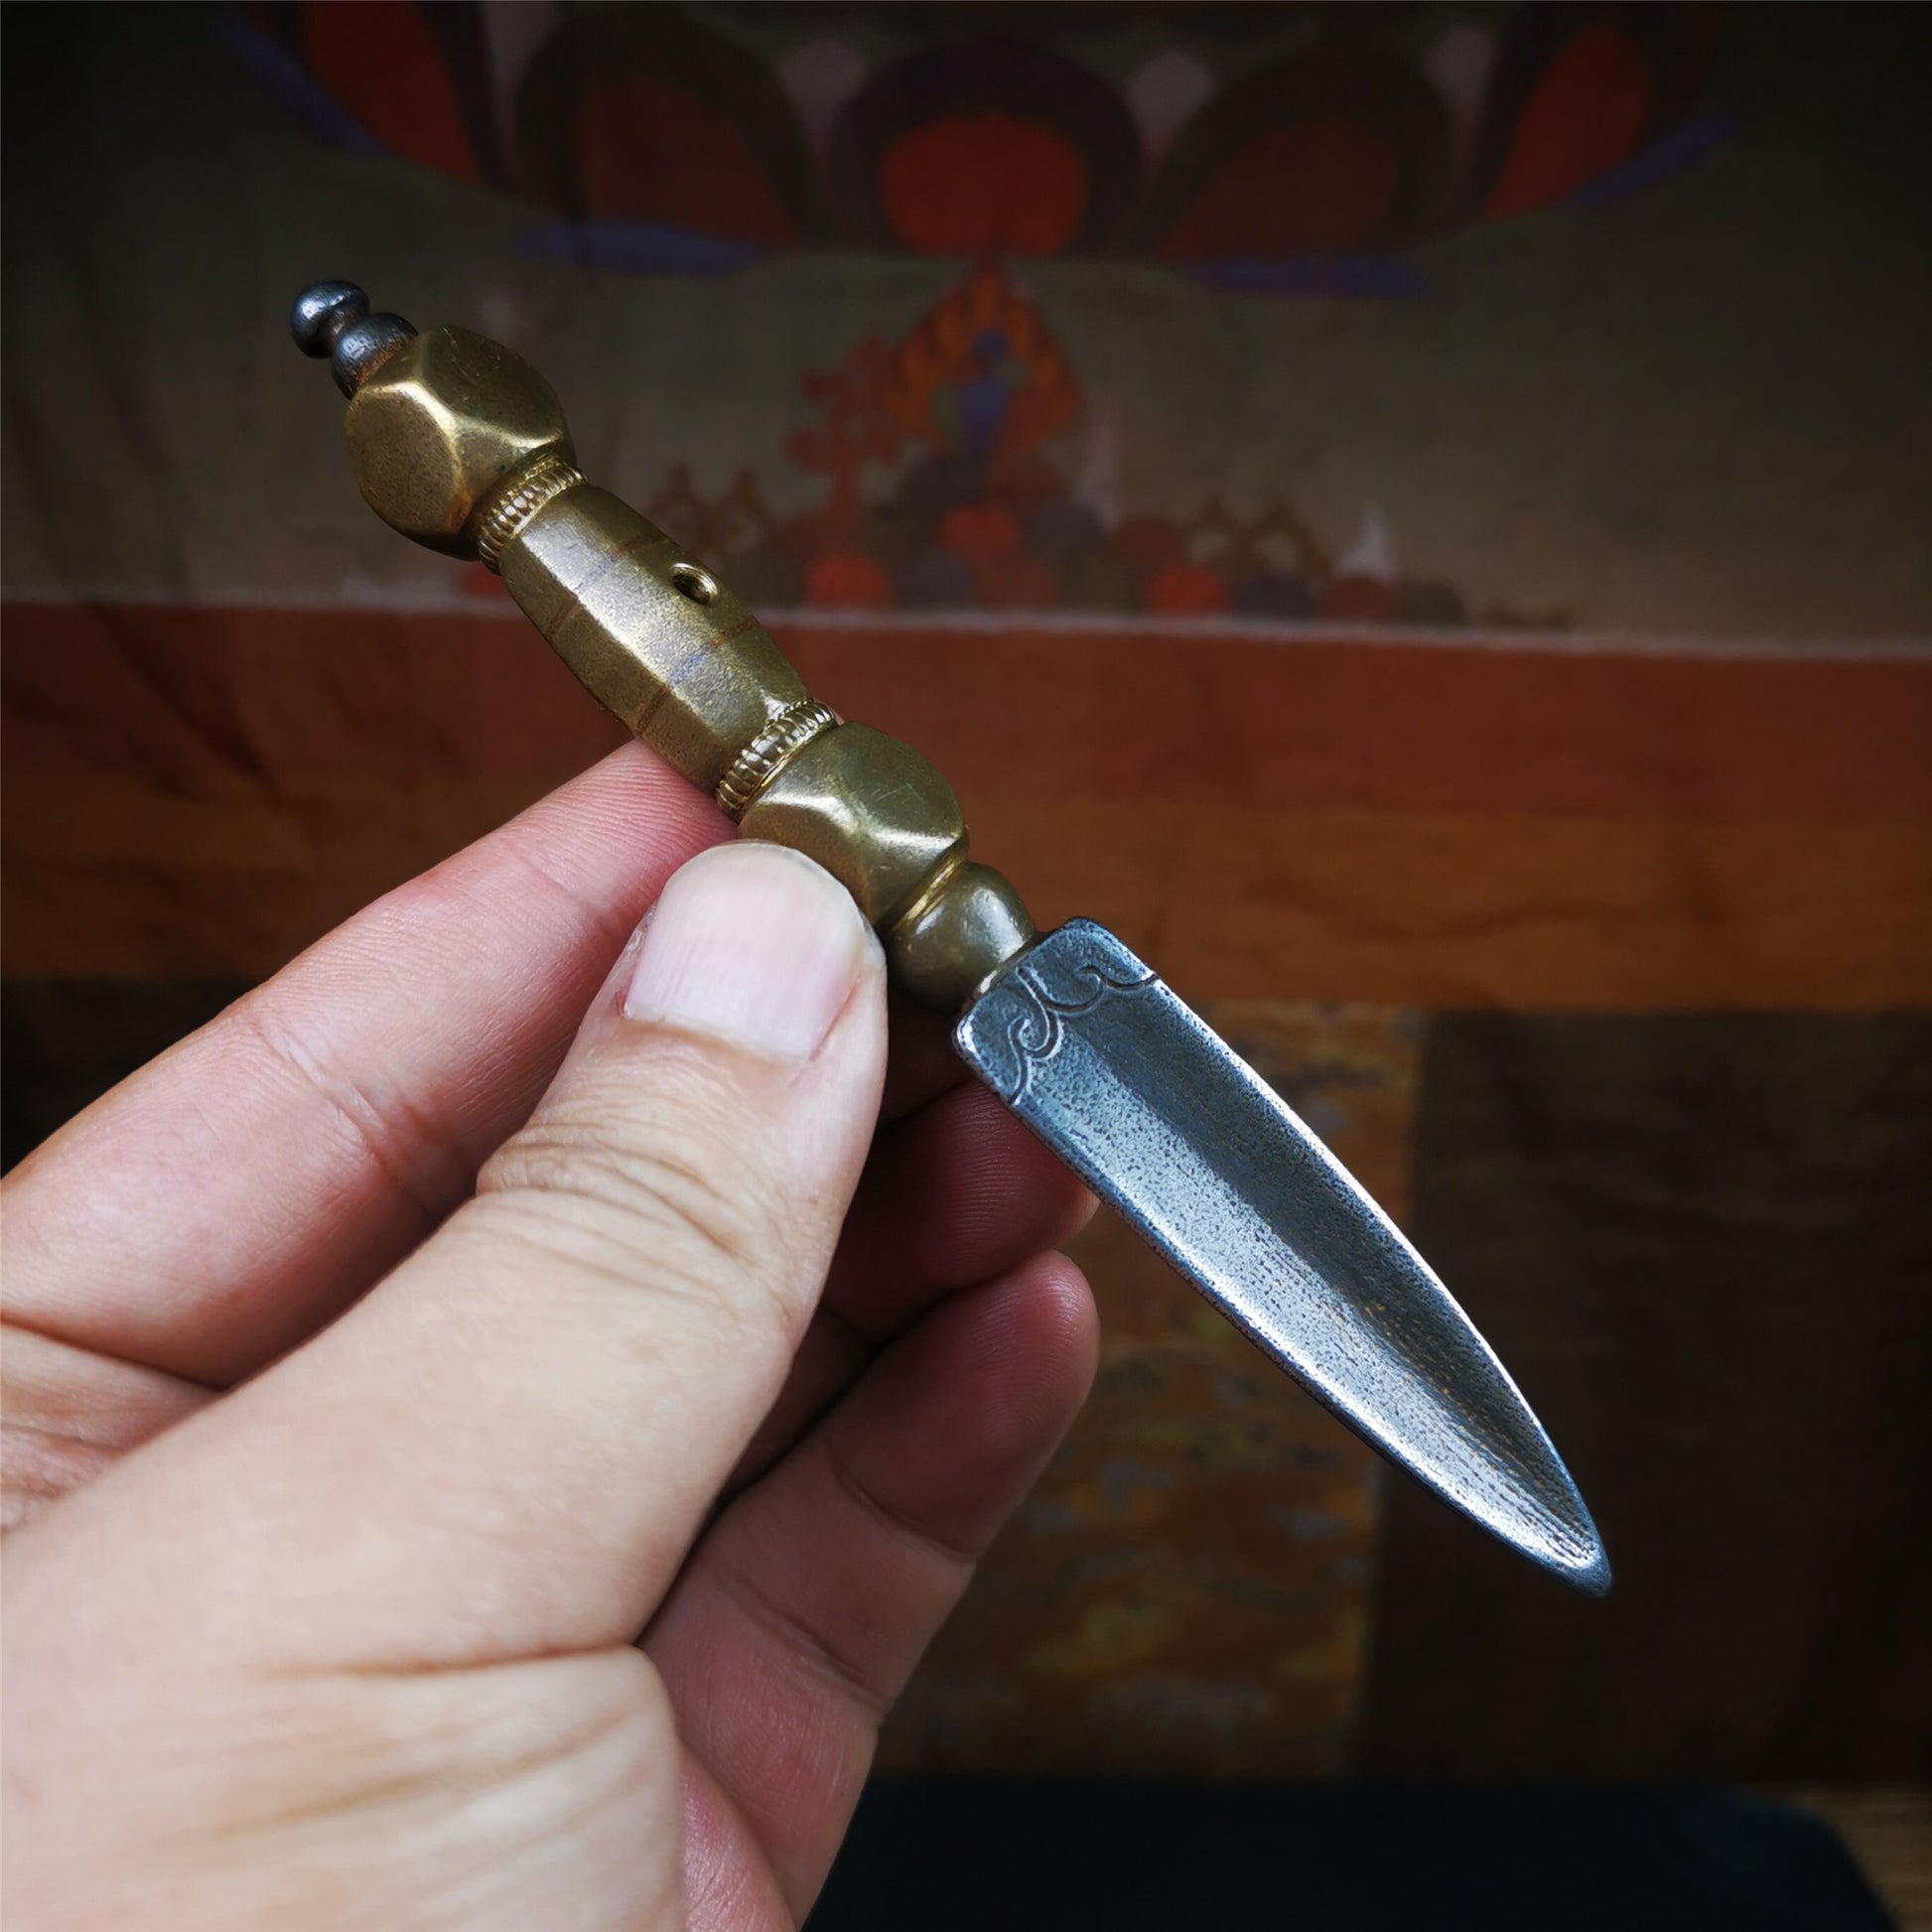 Gandhanra Handmade Tibetan Buddhist Ritual Implement - Kila -Dorje Phurba,Made of Cold Iron inlaid with Brass,5.1".The handle is made of brass and the blade is made of cold iron,very delicate.Handmade by Tibetan craftsmen from Tibet in 1990's.